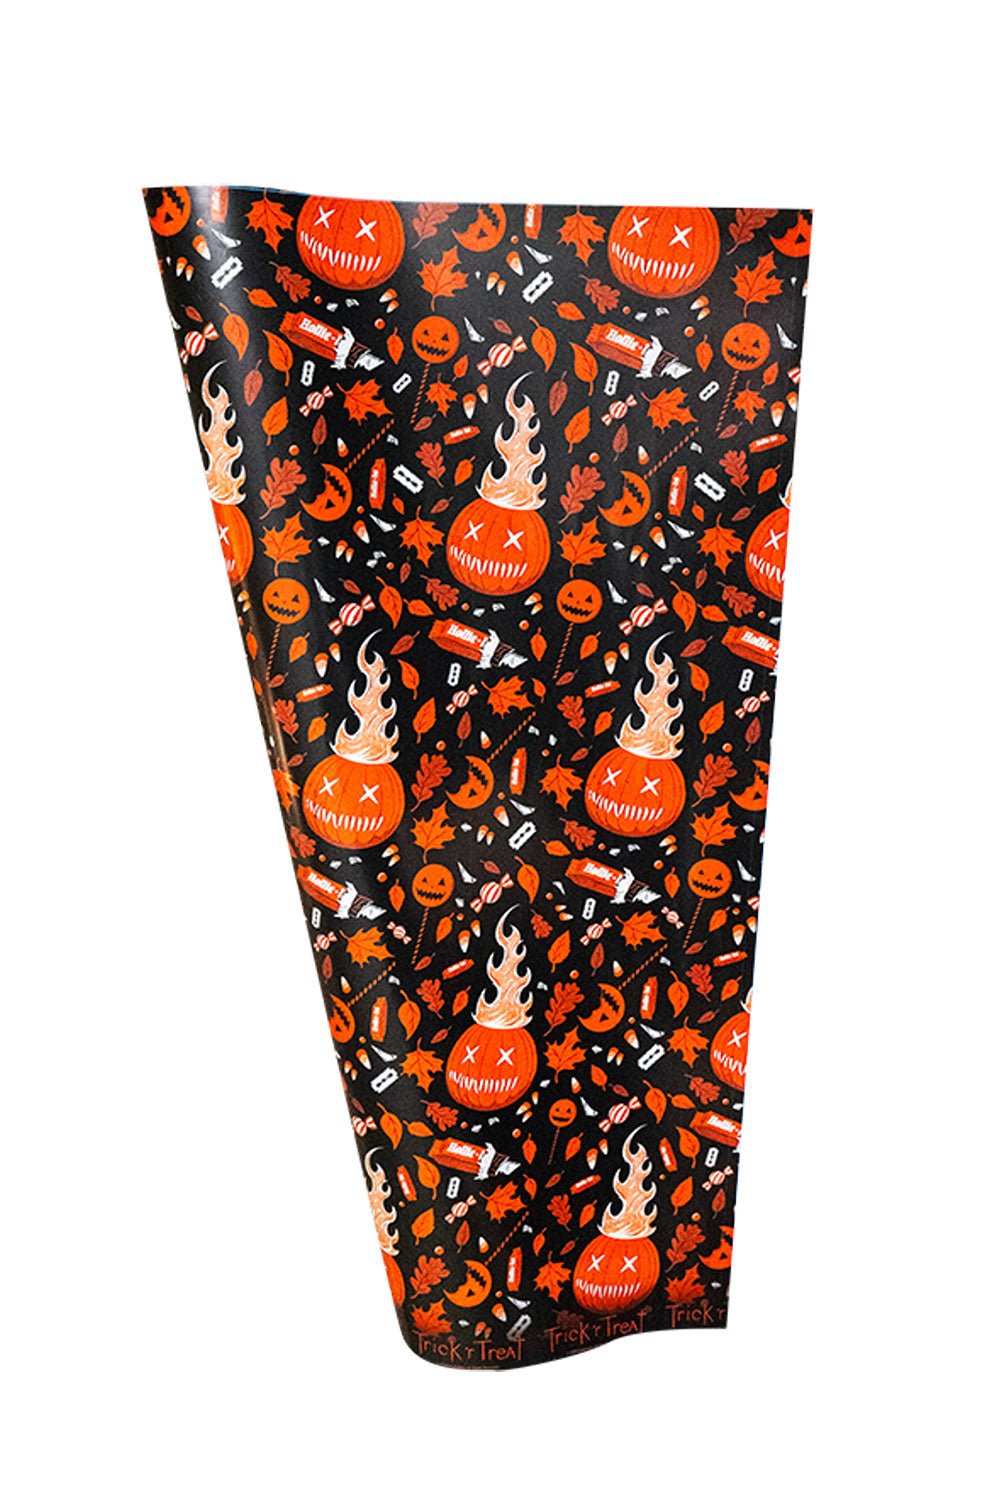 Wrapped in Terror Trick R Treat Wrapping Paper